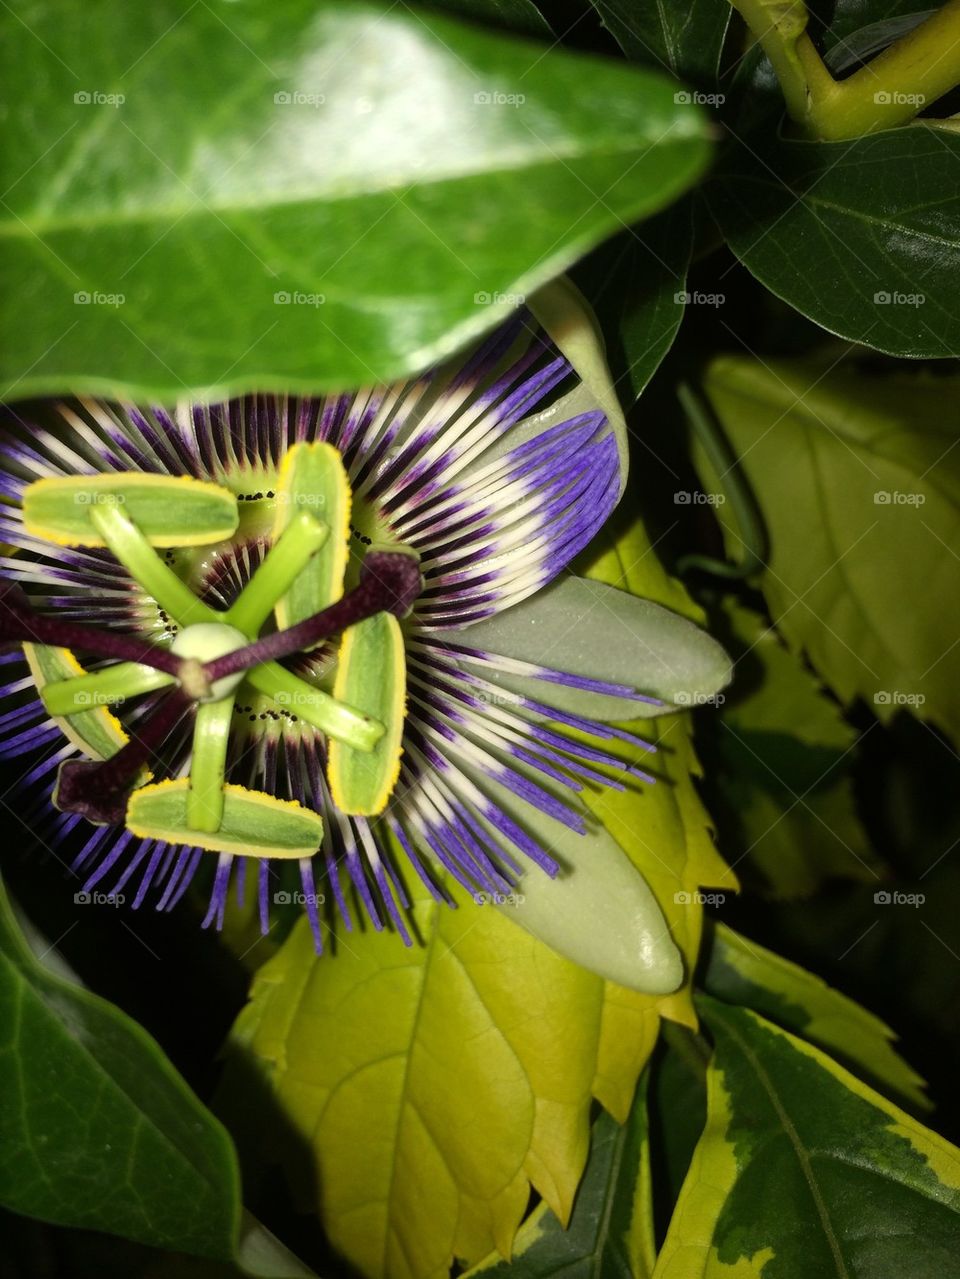 Single passionflower